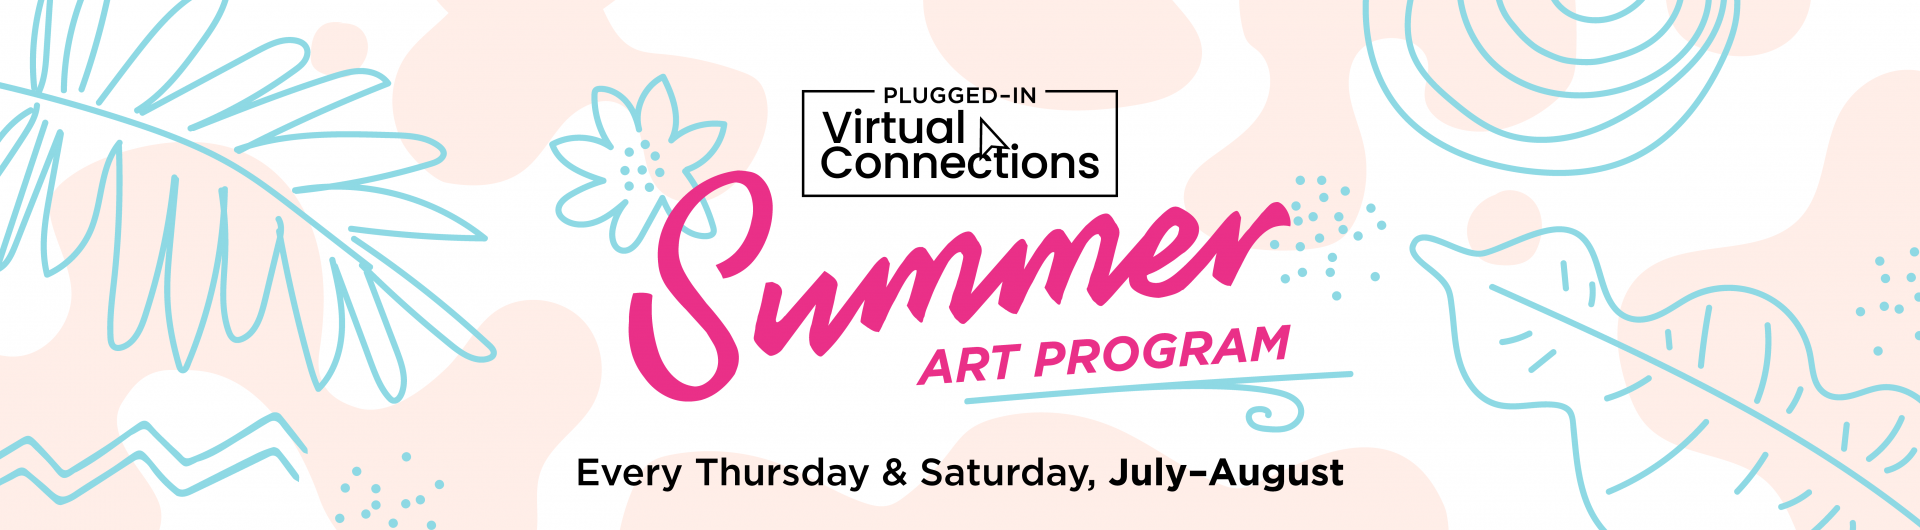 Plugged-In Virtual Connections Summer Program every thursday and saturday in July and August 2021